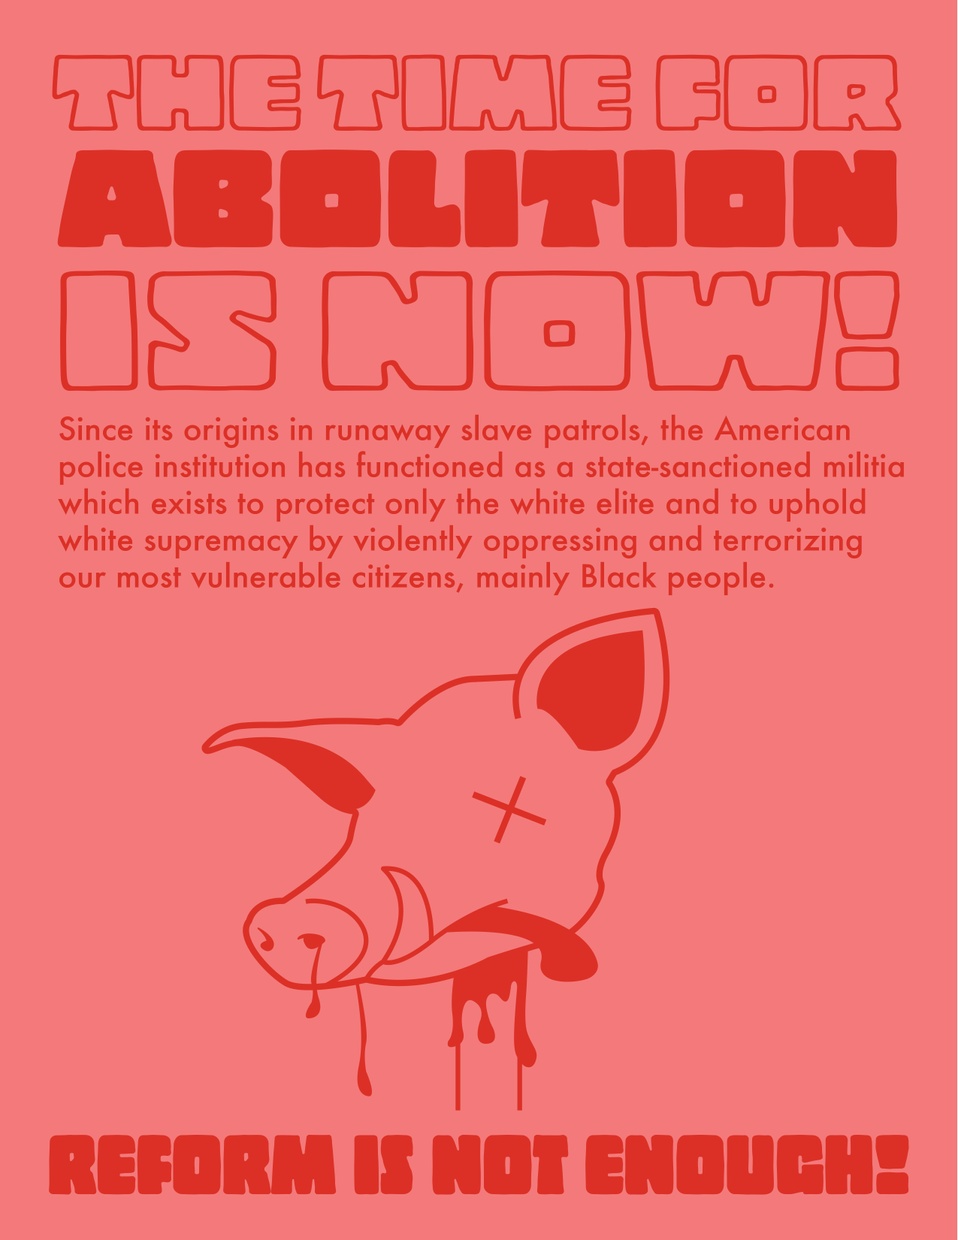 Poster with pink background and red text with title "THE TIME FOR ABOLITION IS NOW" depicting a pig’s head with "x" as an eye and tongue hanging out indicating it is dead.